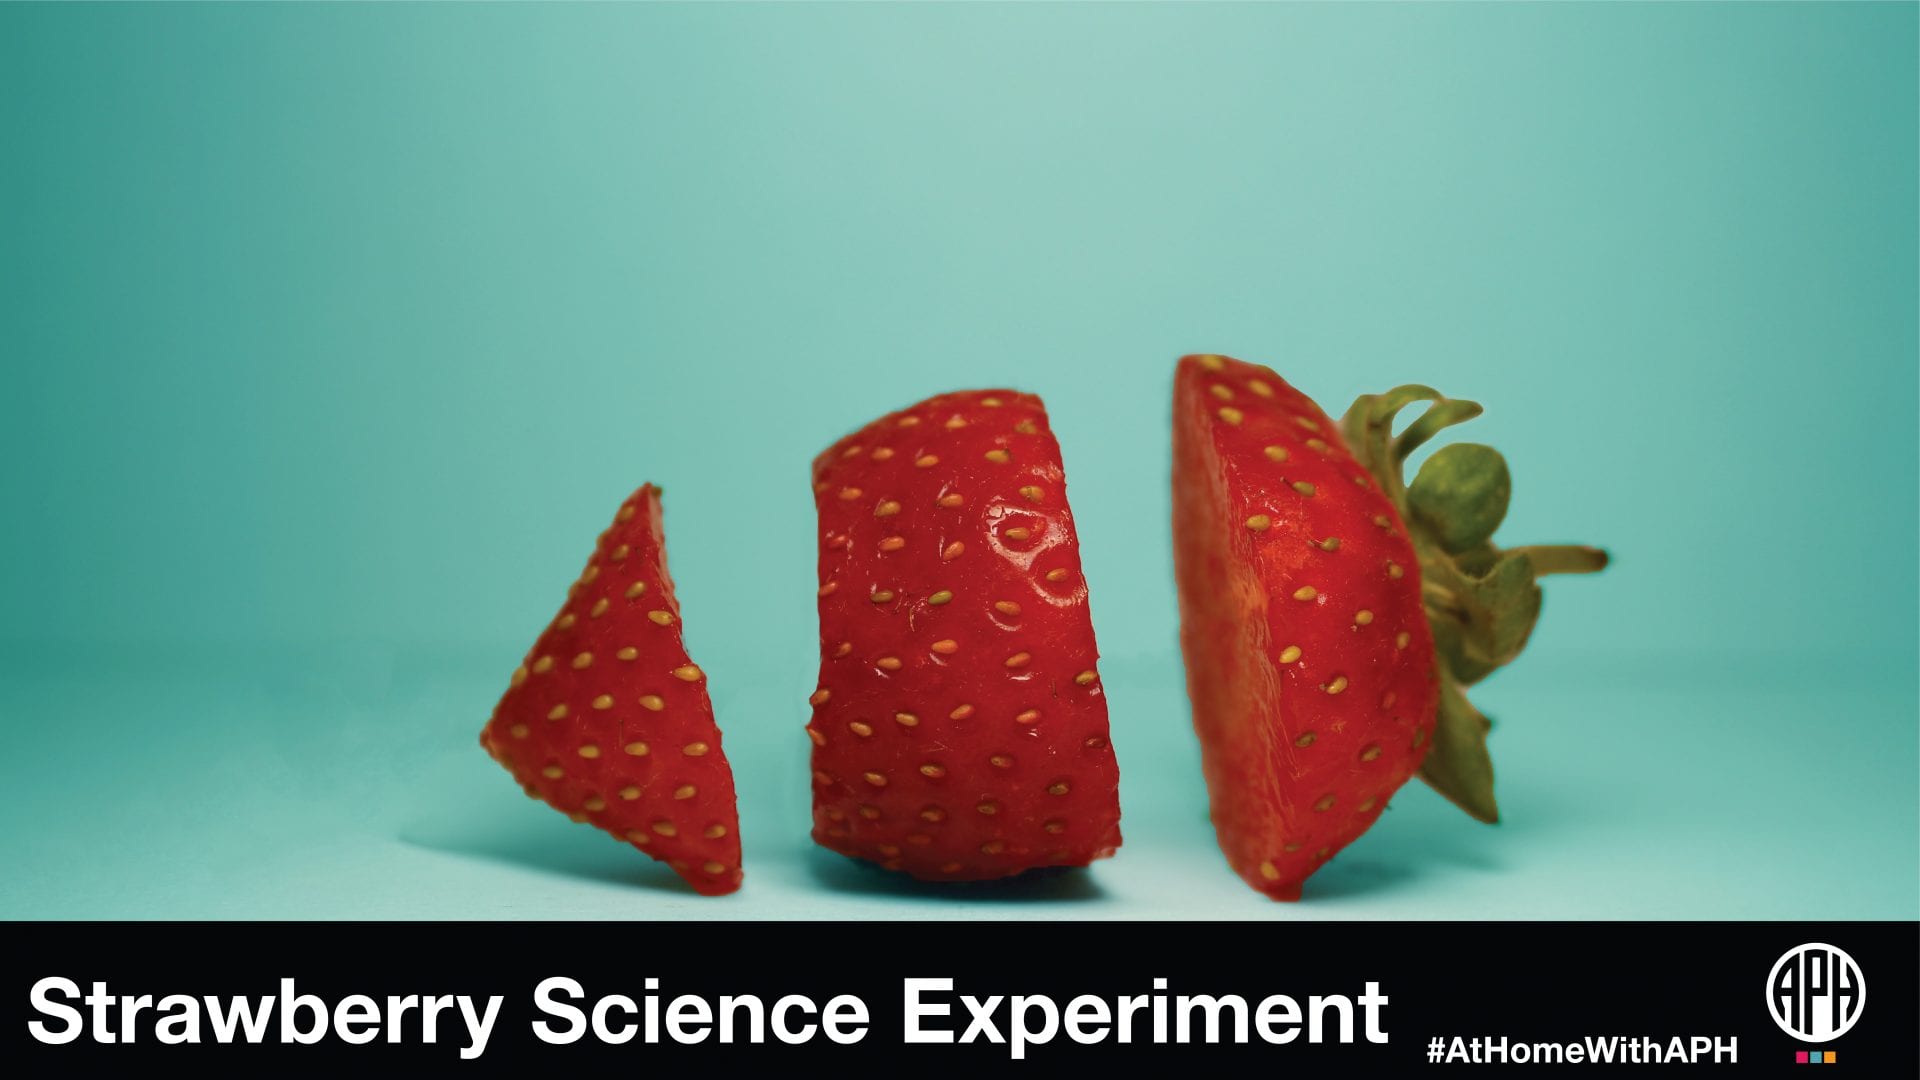 image of a strawberry sliced on a blue background. text reads "Strawberry Science Experiment #AtHomeWithAPH"